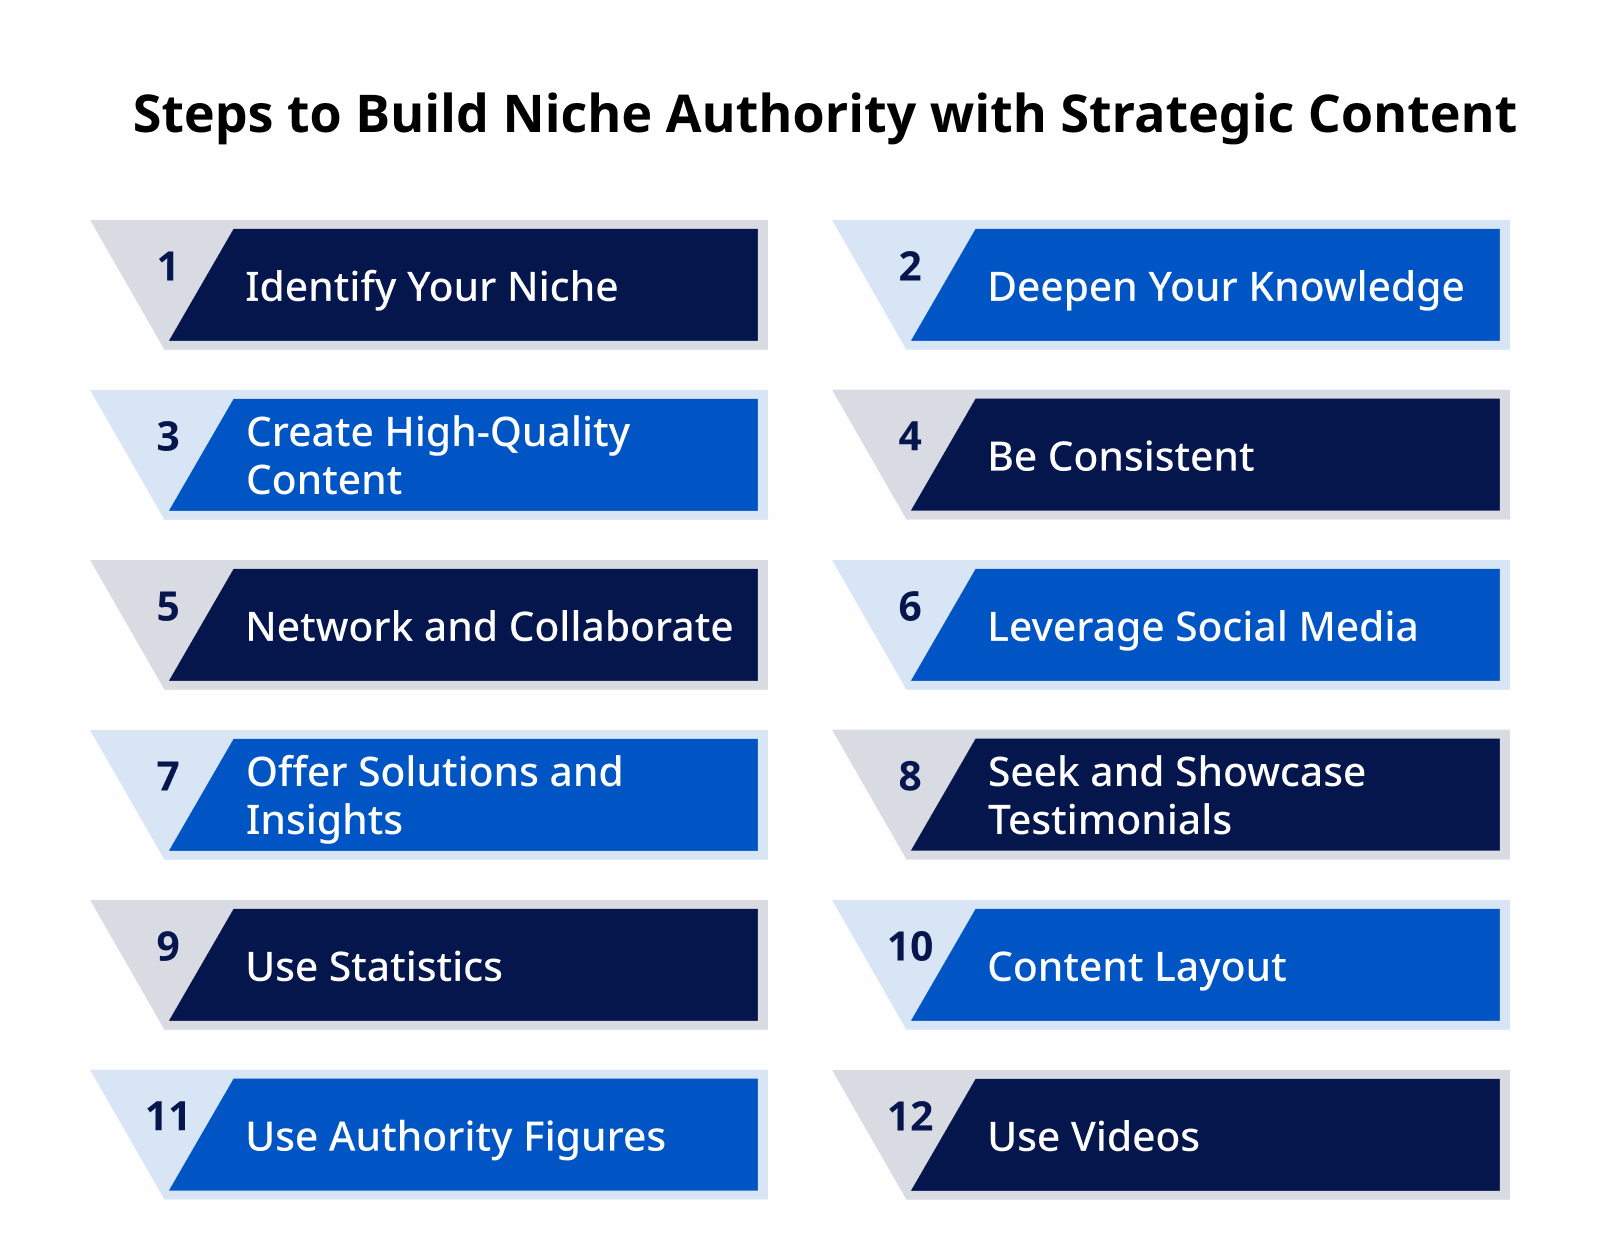 Steps to Build Niche Authority with Strategic Content